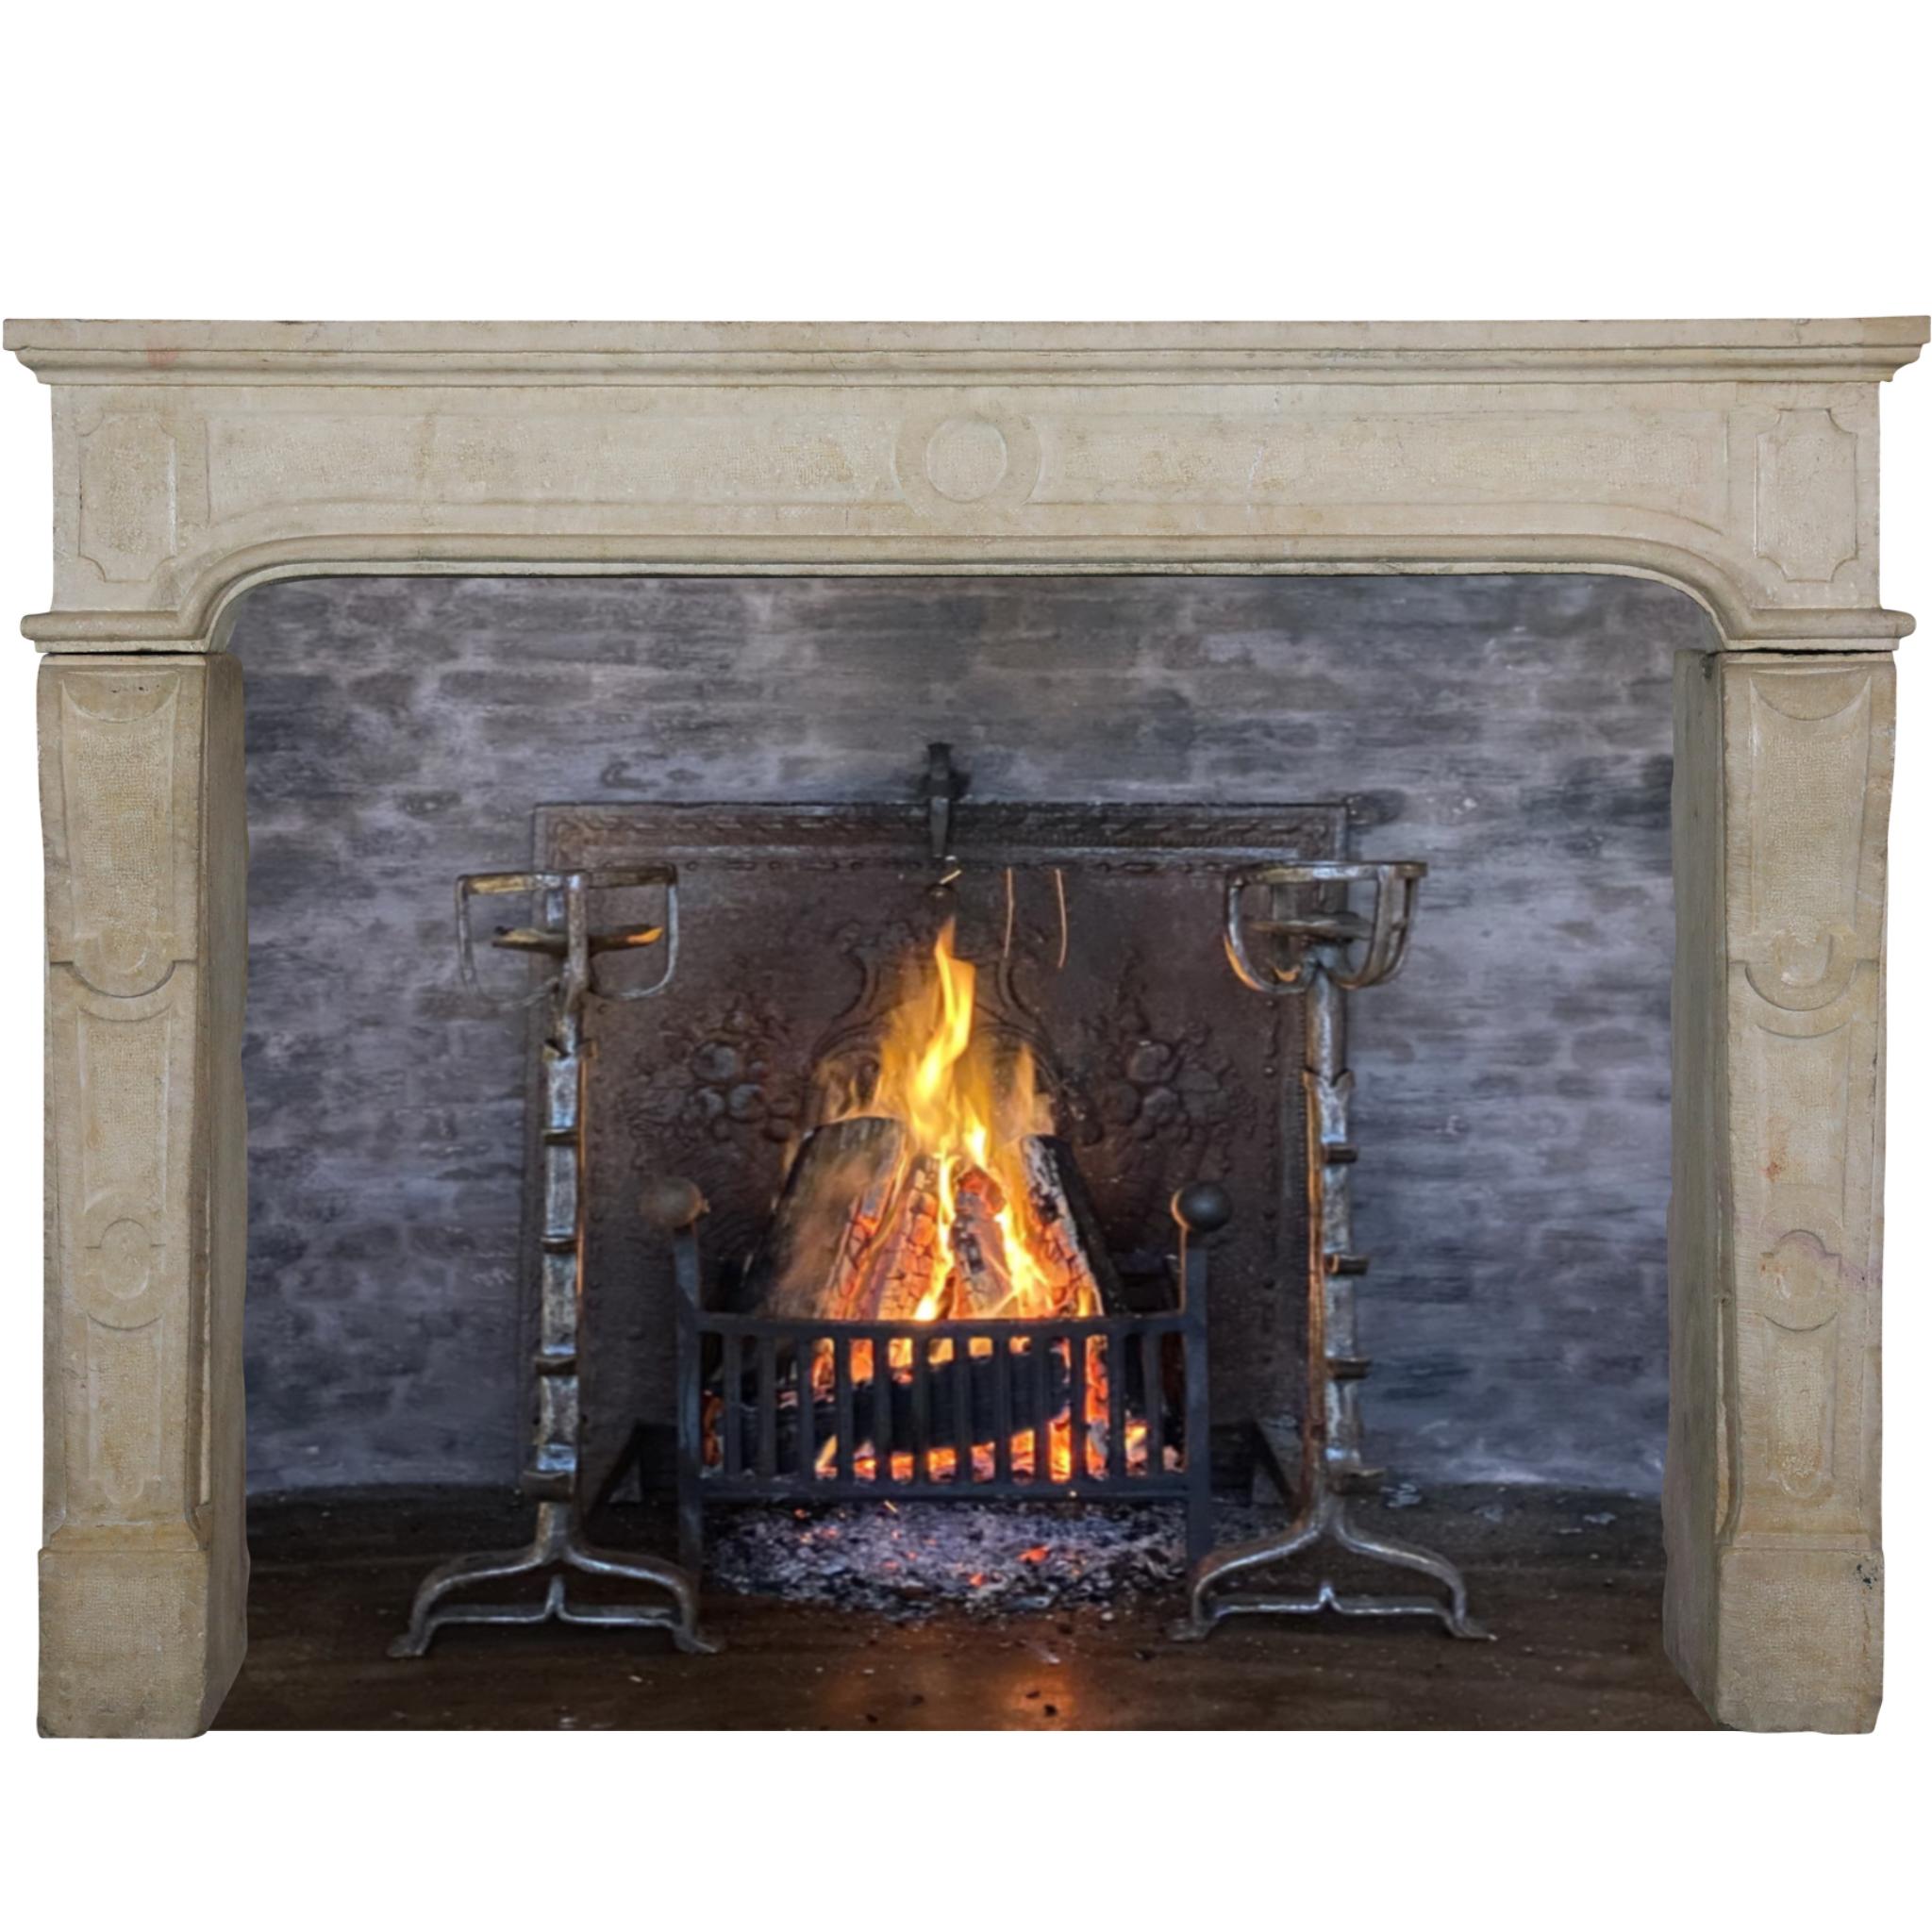 Strong French Beige Hard Limestone Decorative Small Fireplace Surround For Sale 8